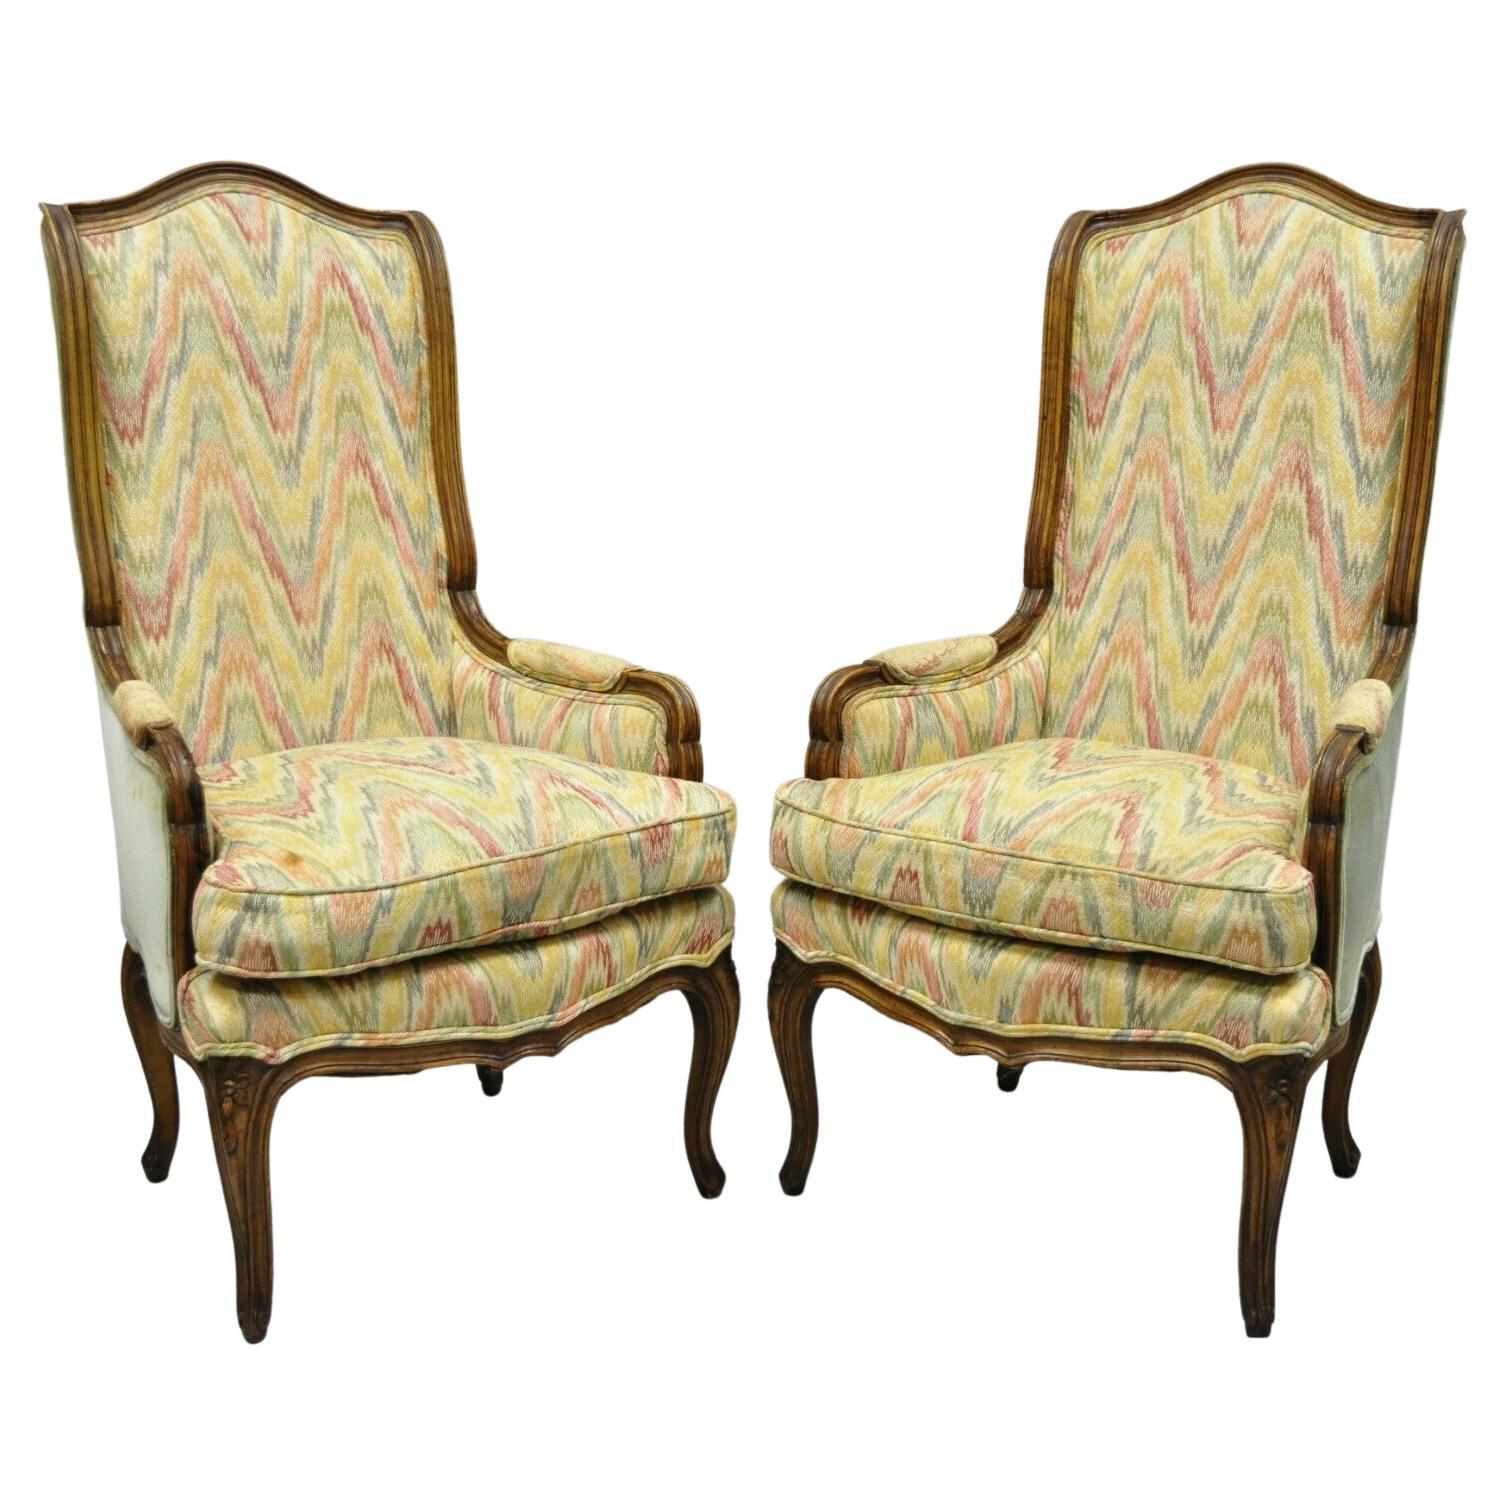 Vintage French Provincial Louis XV Country Narrow Tall Back Chairs 'A' - a Pair For Sale